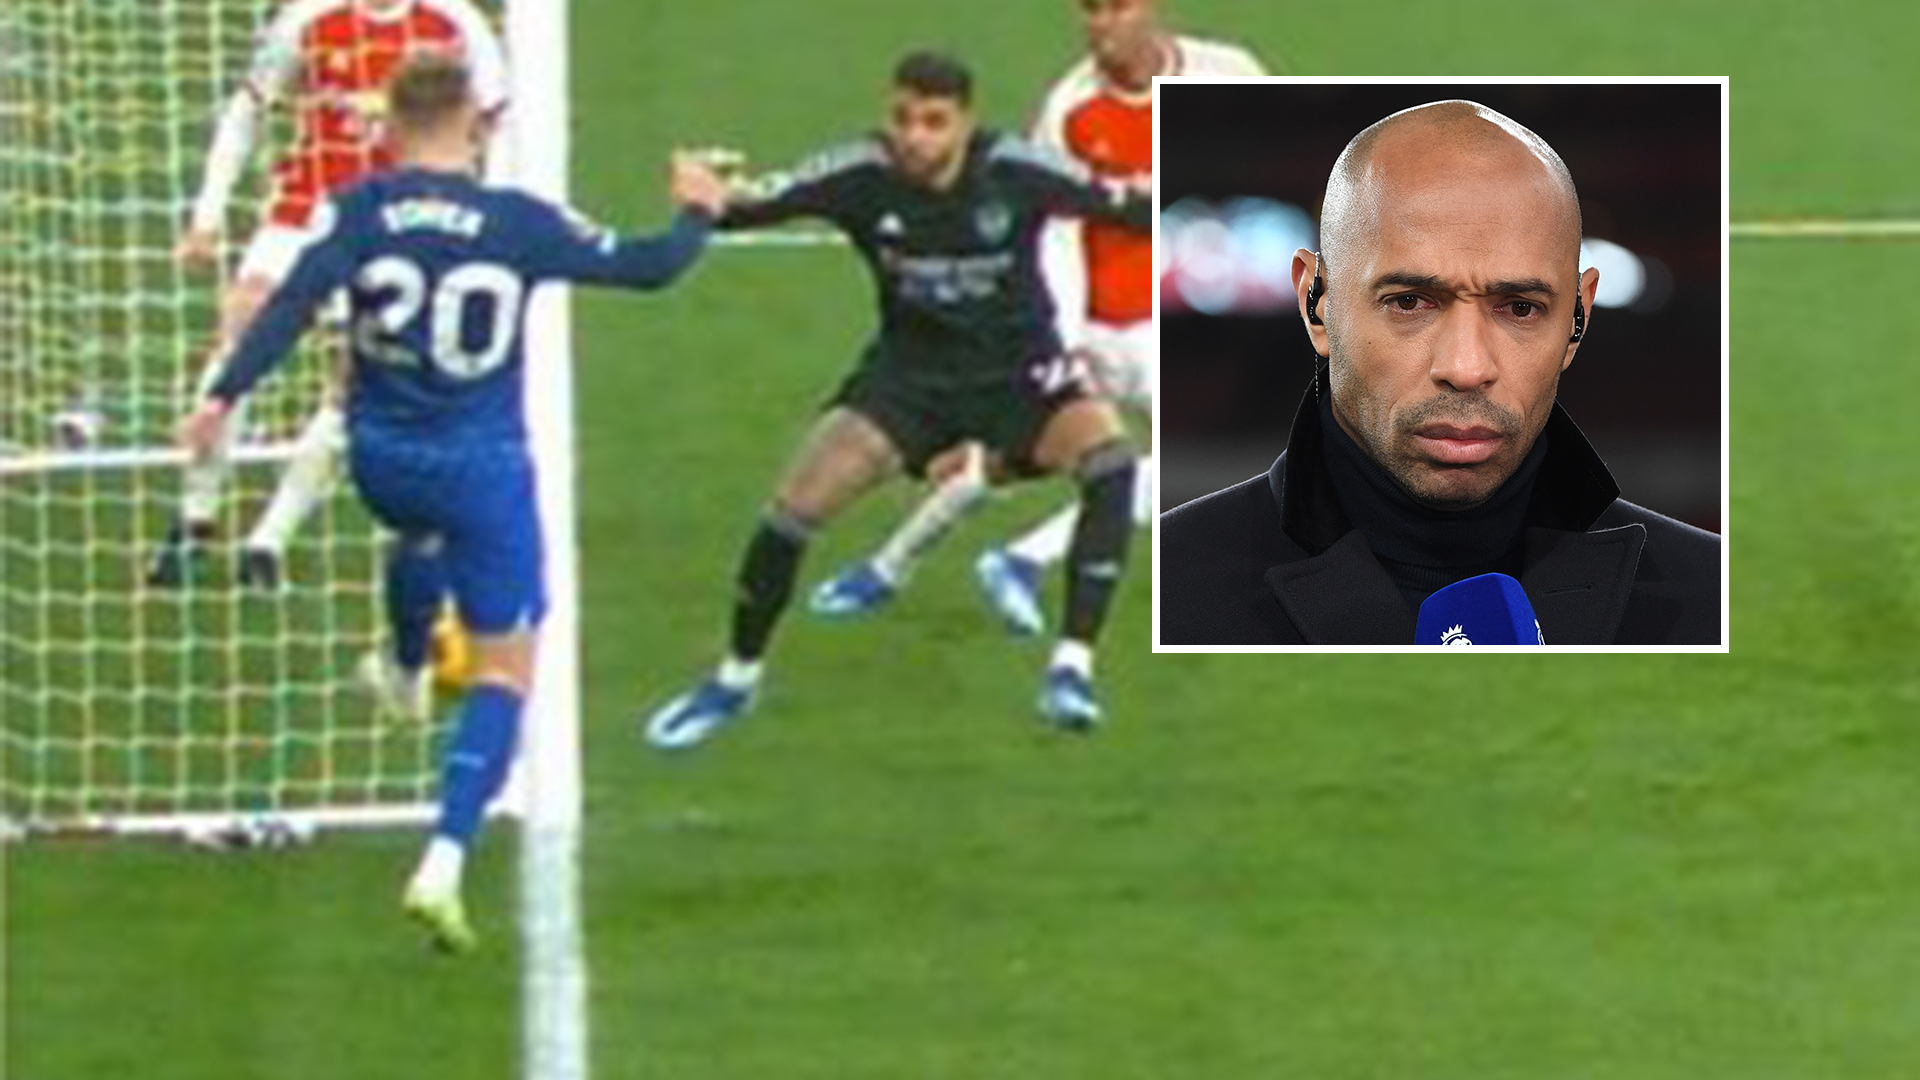 Thierry Henry calls for major change to football rules as Arsenal hit by big VAR controversy in West Ham clash